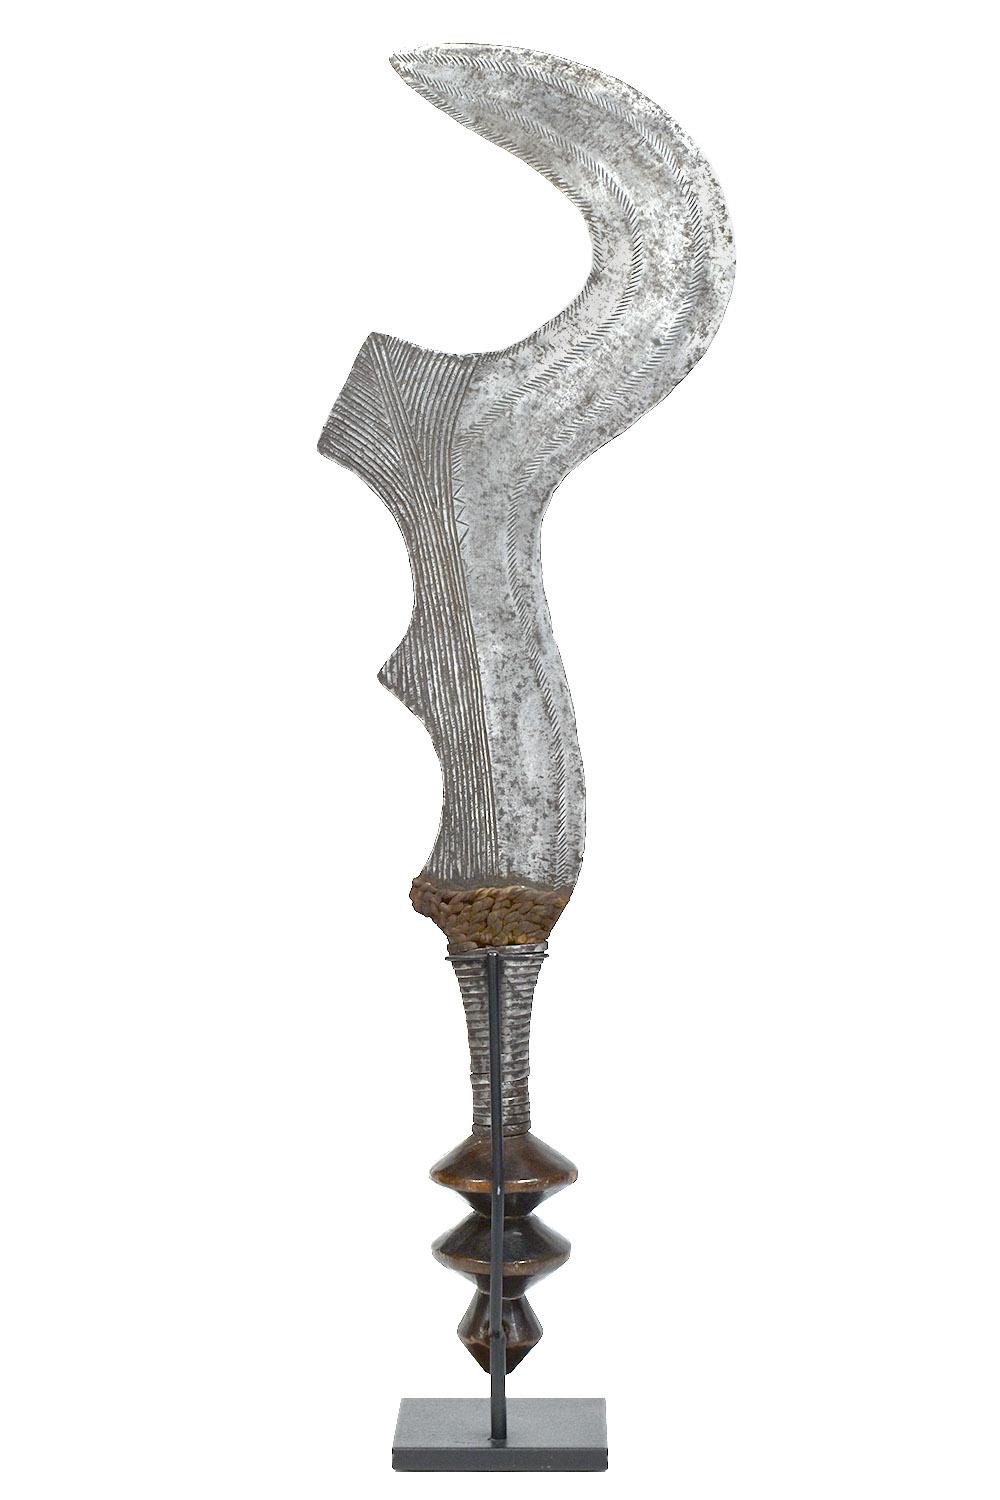 Early 20th century African Ngulu Ceremonial status sword, D.R. Congo
Ngombe Culture, D.R. Congo
Iron, Wood, Leather

This status symbol is carried by a man as an emblem of rank. The sword is a single edged, iron blade engraved with an elaborate